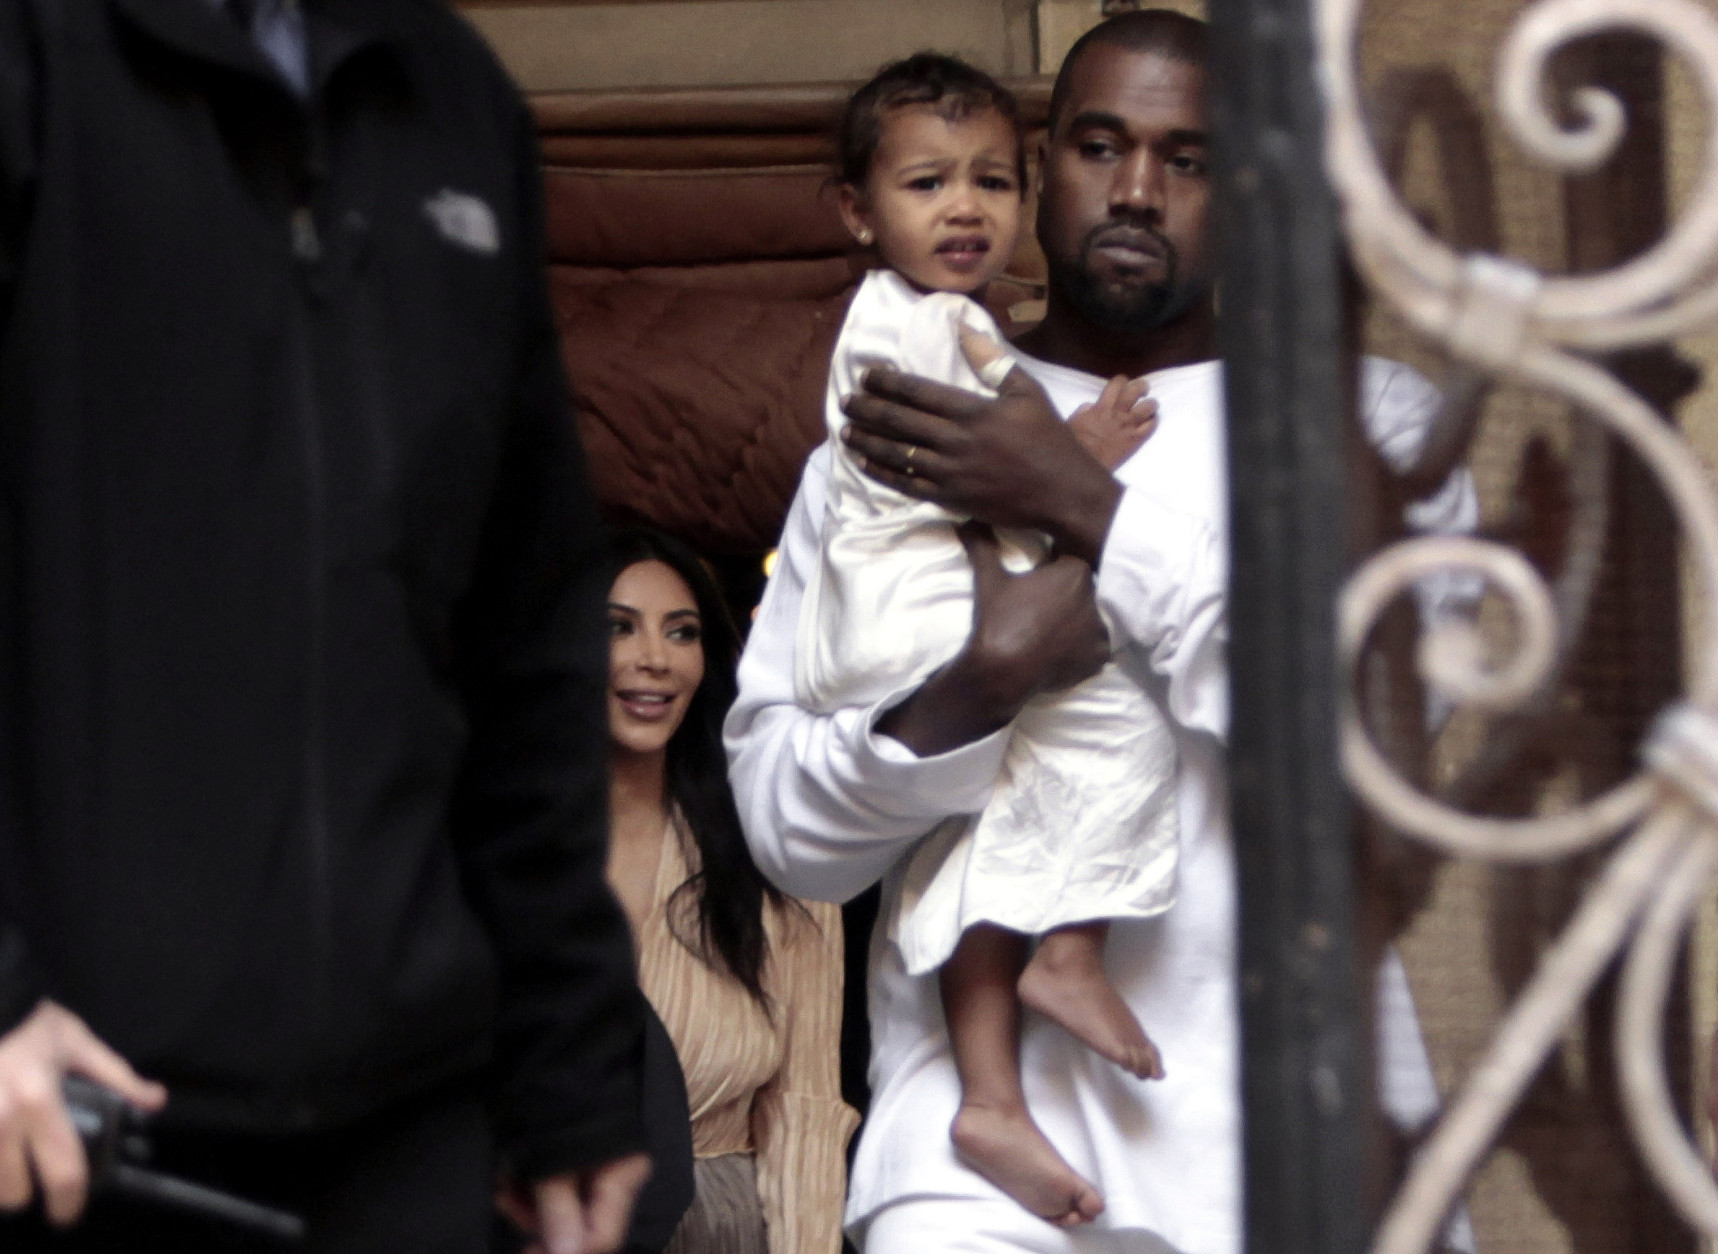 Kim Kardashian, a US reality TV star, and her husband Kanye West holding their daughter North West, walk inside Armenian St. James Cathedral, in Jerusalem, Monday, April 13, 2015. Kim Kardashian, along with husband West, their daughter, North West, and her sister, Khloe, arrived to Israel on a private visit.  (AP Photo/Mahmoud Illean)